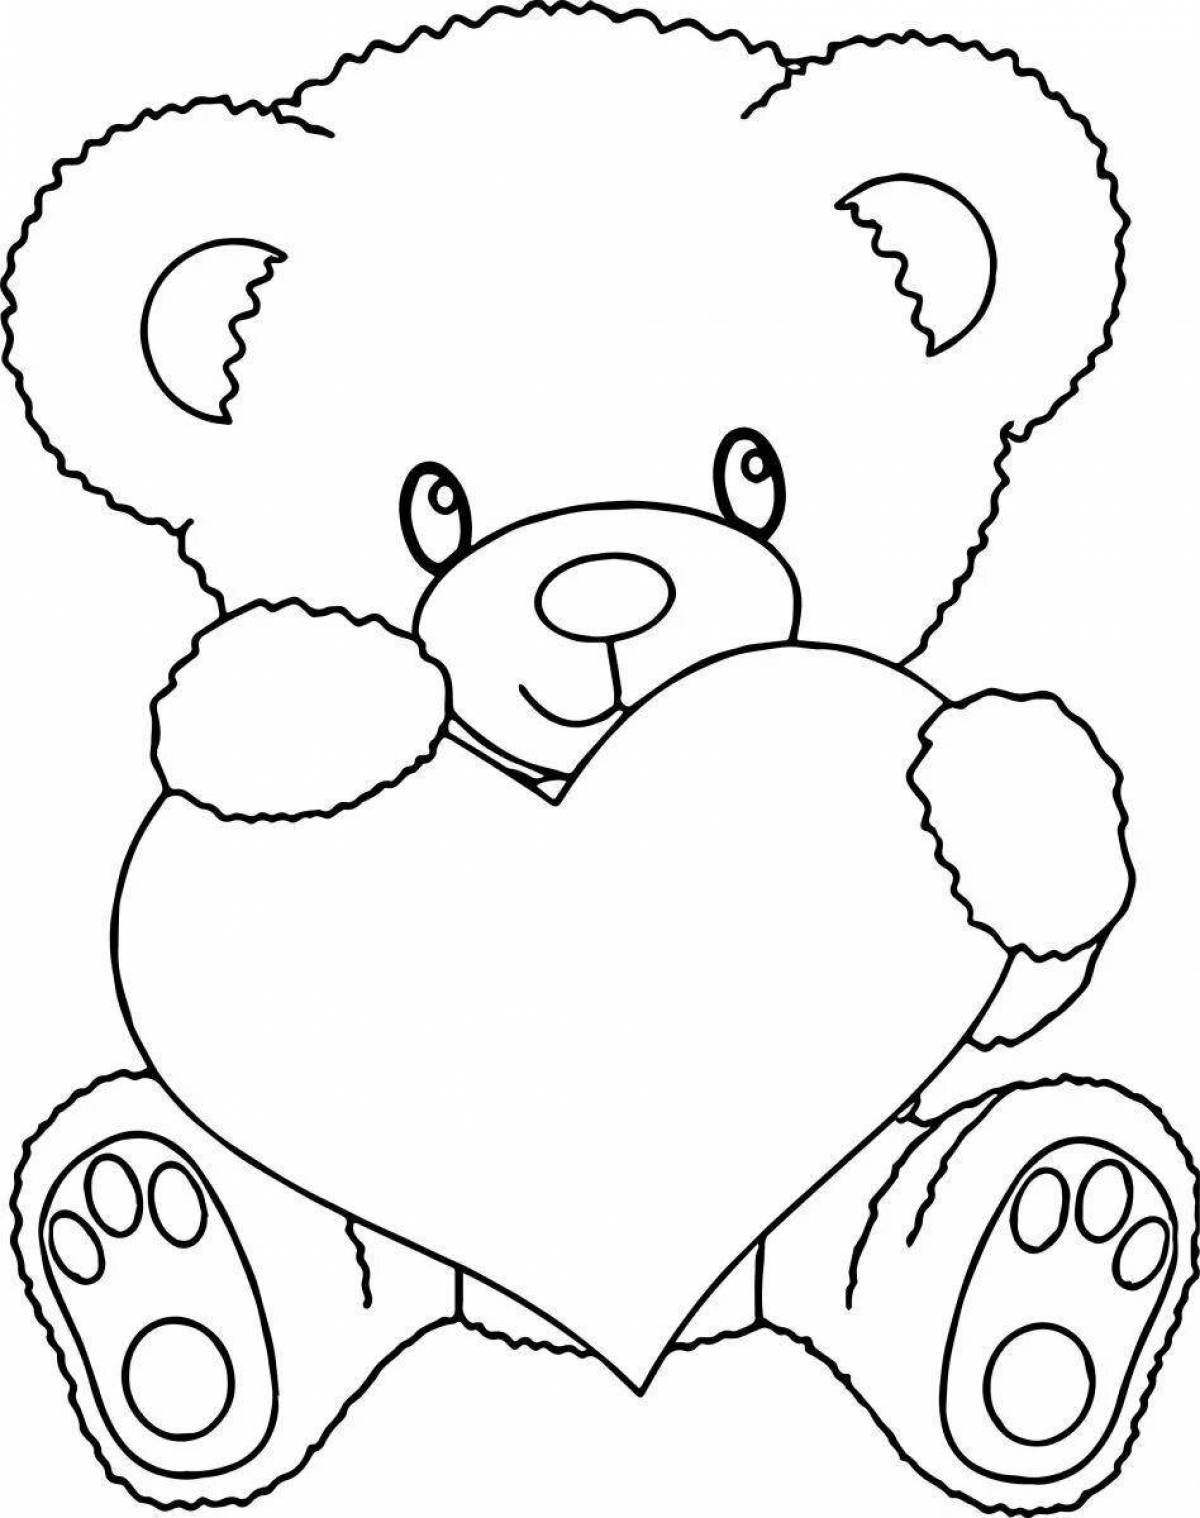 Fluffy teddy bear with heart coloring book